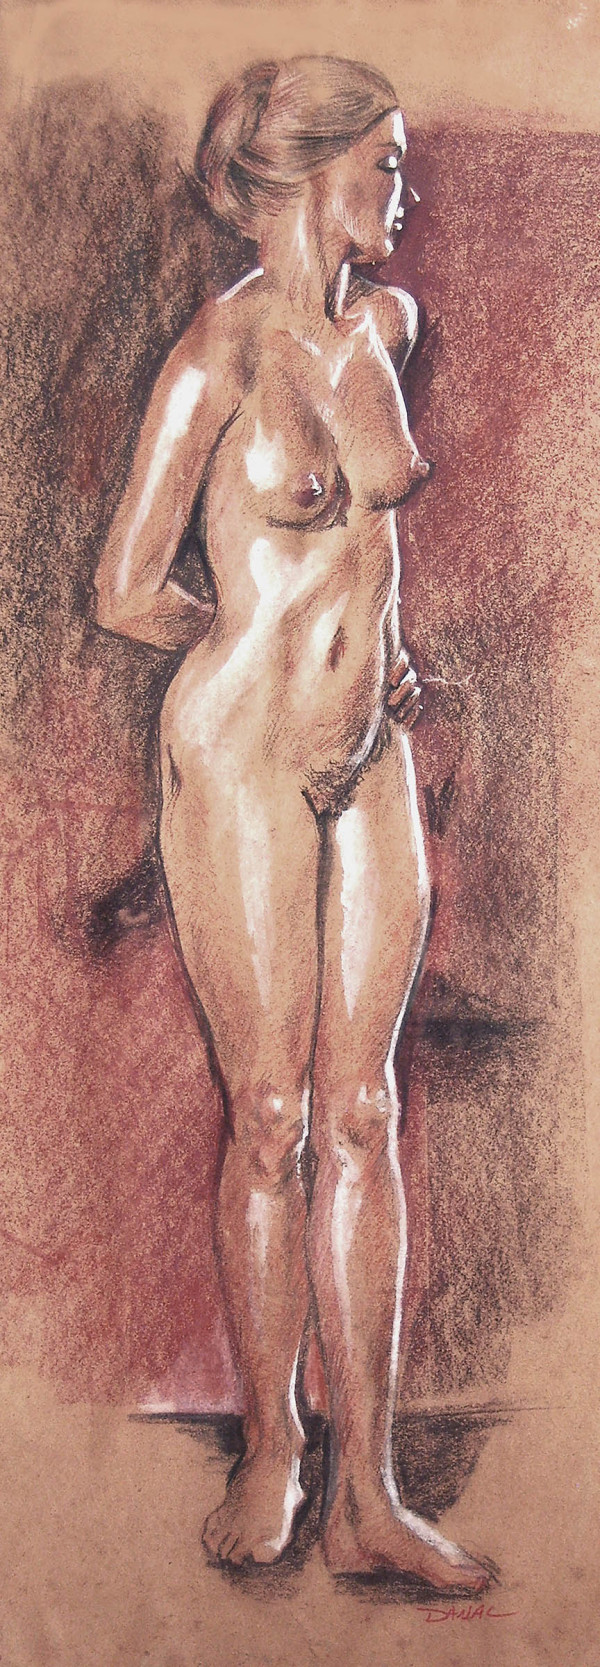 standing nude study by Dan Terry